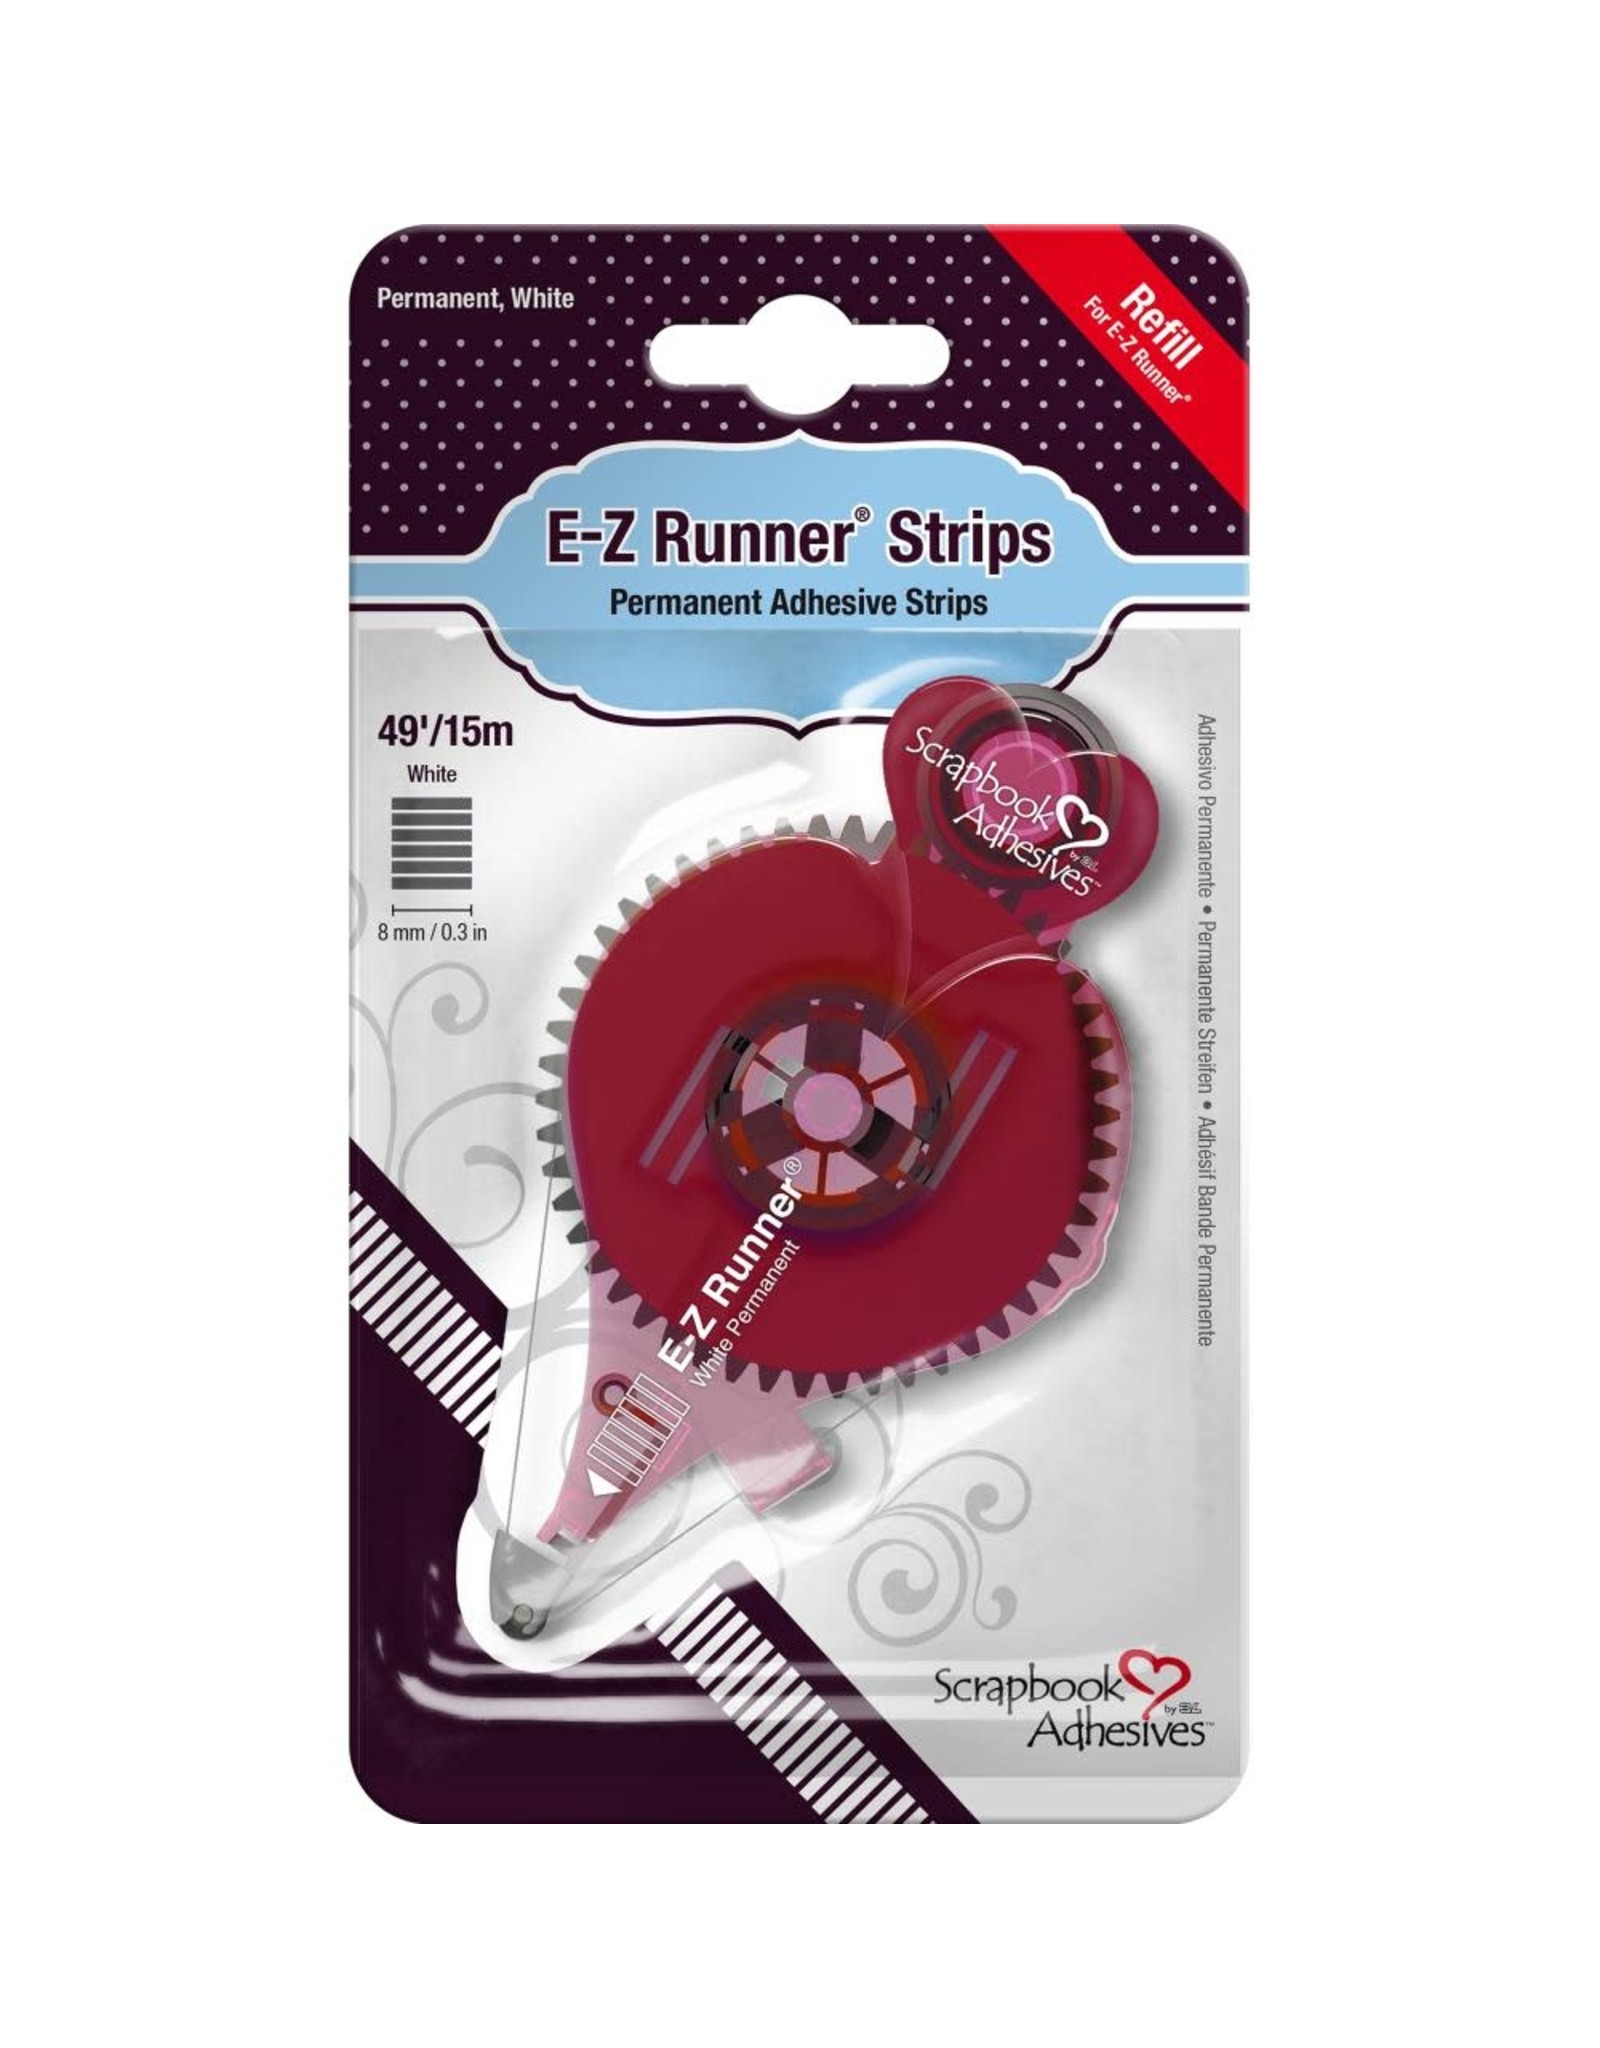 Scrapbook Adhesives E-Z Runner Permanent Strips Refill-small red